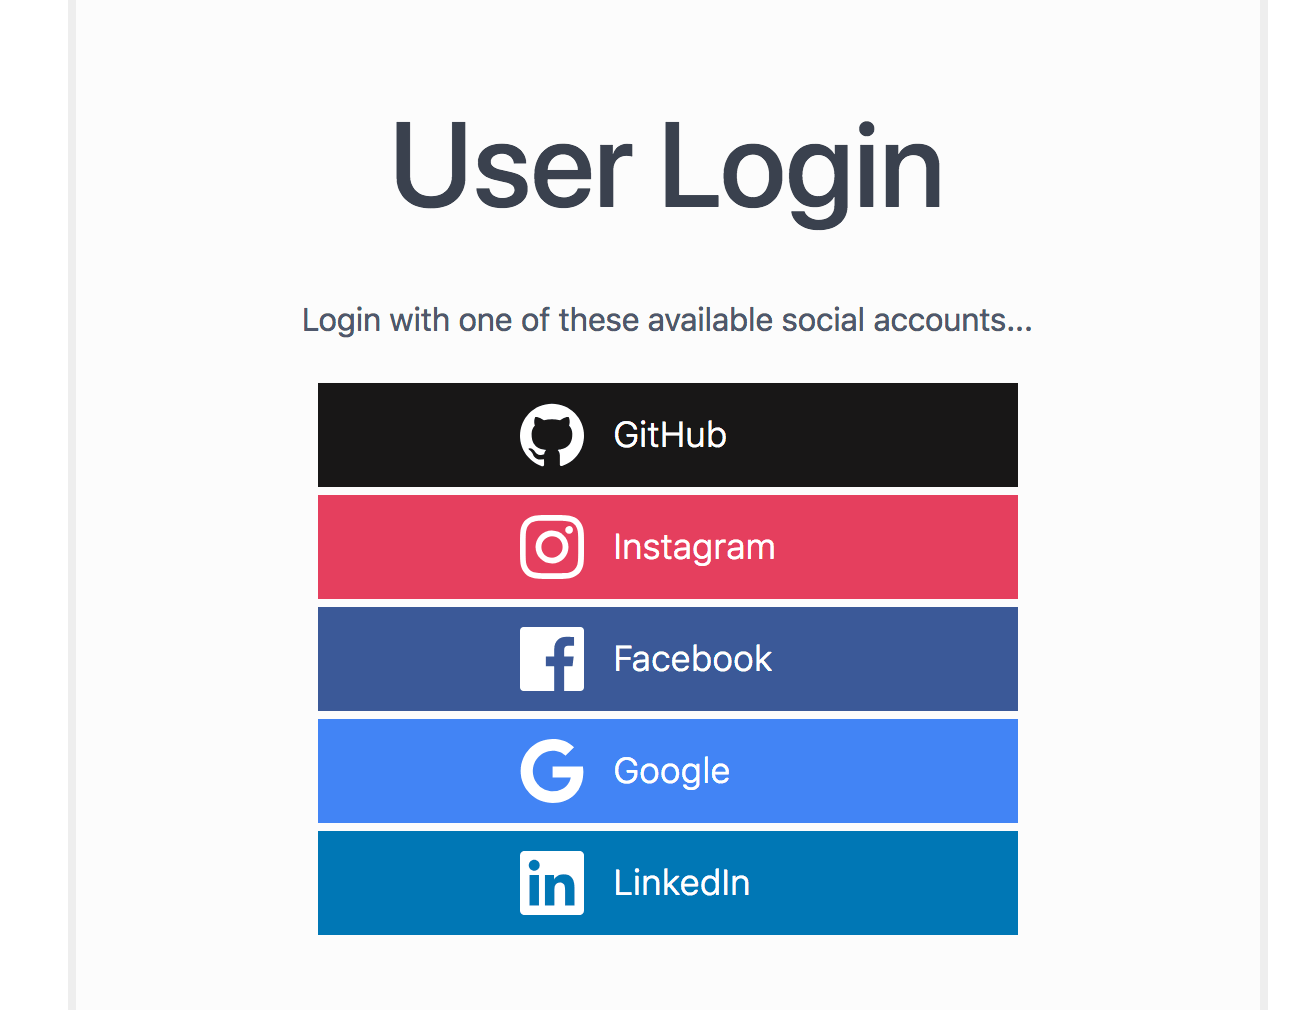 SignUp with Facebook using VueJS. Sign-in / Sign-up with Facebook